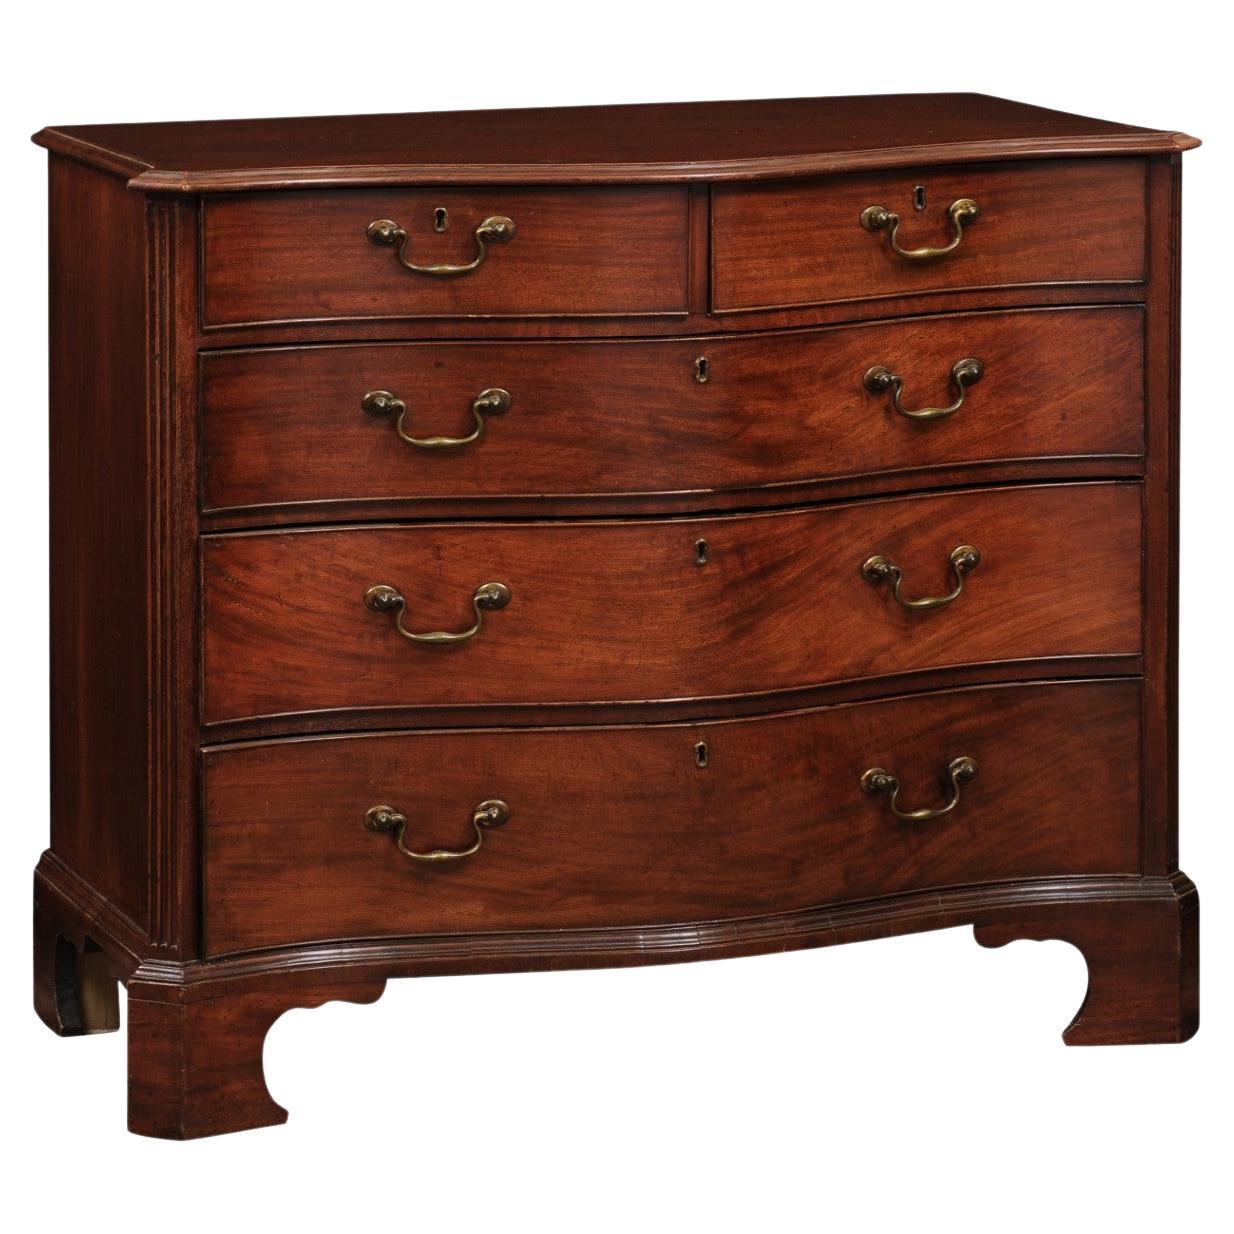 Late 18th Century English George III Mahogany Serpentine Chest with 5 Drawers